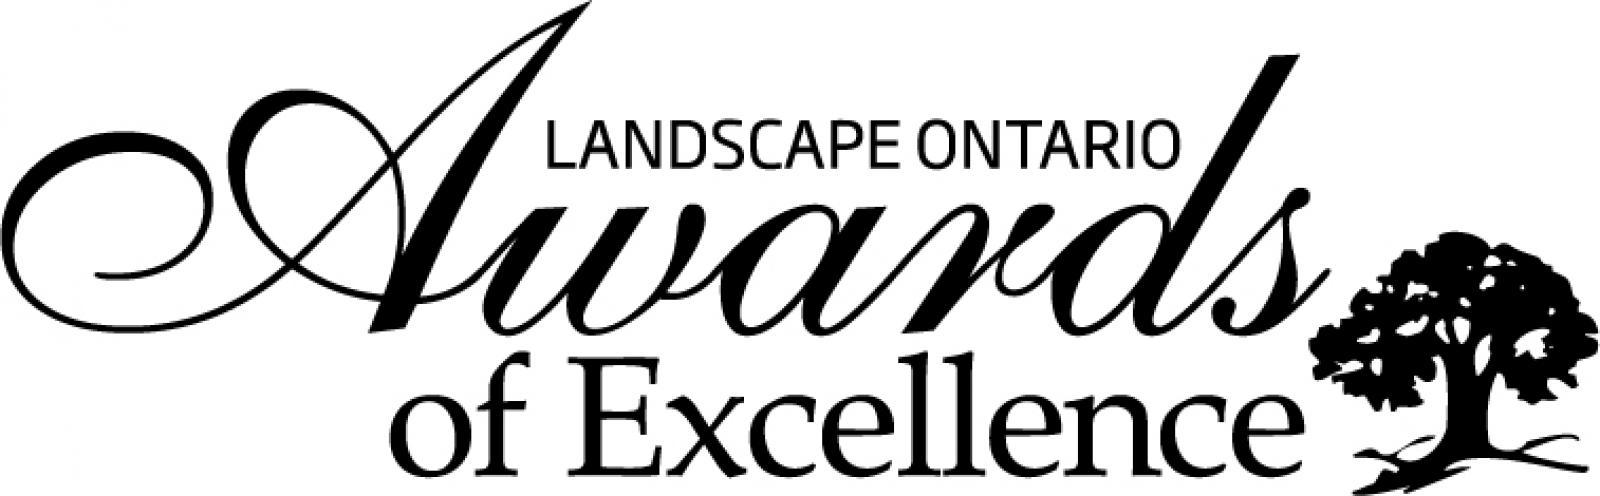 Awards of Excellence program continues for 2020